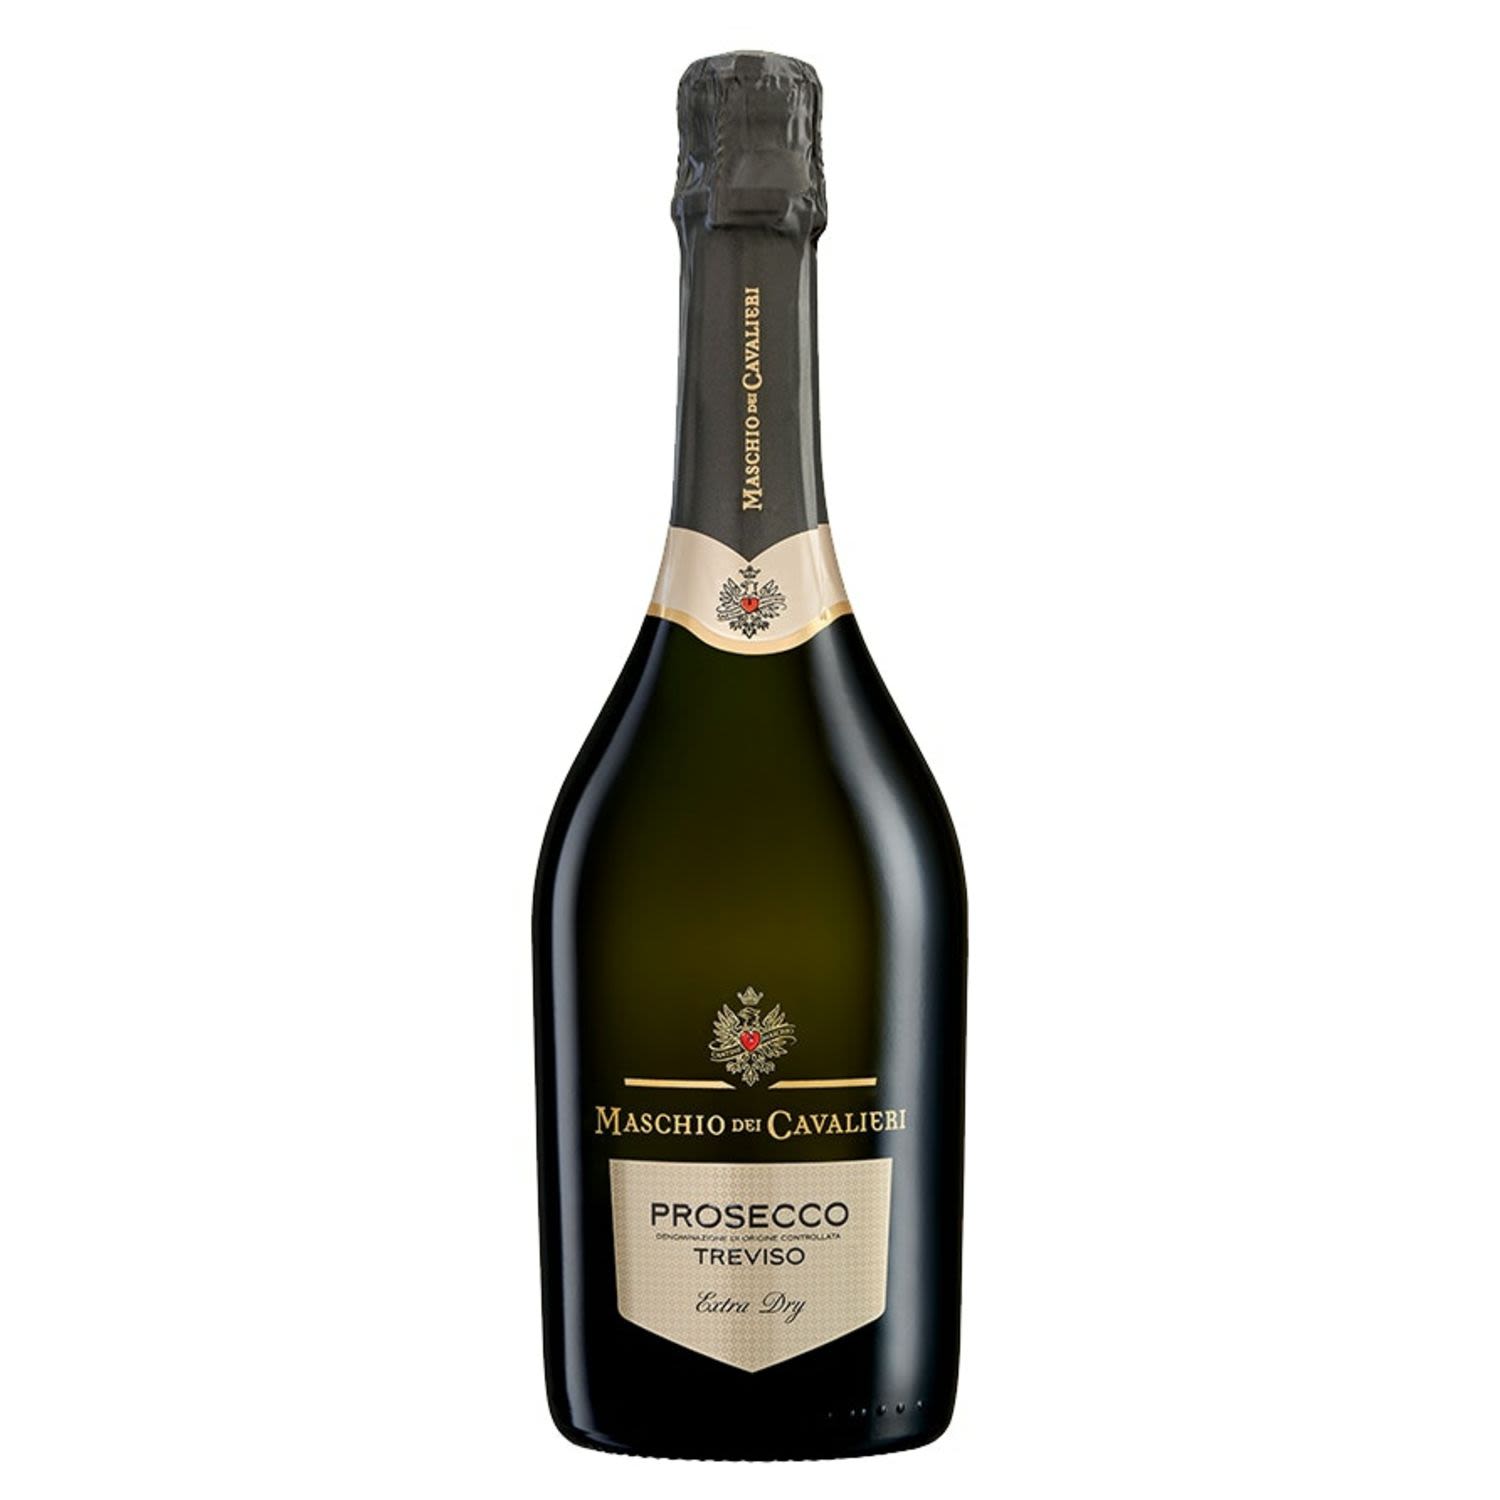 Aromas of candied fruit with a lively froth. This prosecco is clean and aromatic. Prosecco is typically all about delivering a fresh, light and lively style perfect to have as an aperitif before a meal and be very easy drinking. Originating in the Veneto region of north eastern Italy, the source of which comes from the ancient vineyards on the slopes of the alpine areas which is the perfect cool climate for the production of high-quality fruit.<br /> <br />Alcohol Volume: 11.00%<br /><br />Pack Format: Bottle<br /><br />Standard Drinks: 6.5</br /><br />Pack Type: Bottle<br /><br />Country of Origin: Italy<br /><br />Region: Veneto<br /><br />Vintage: Non Vintage<br />